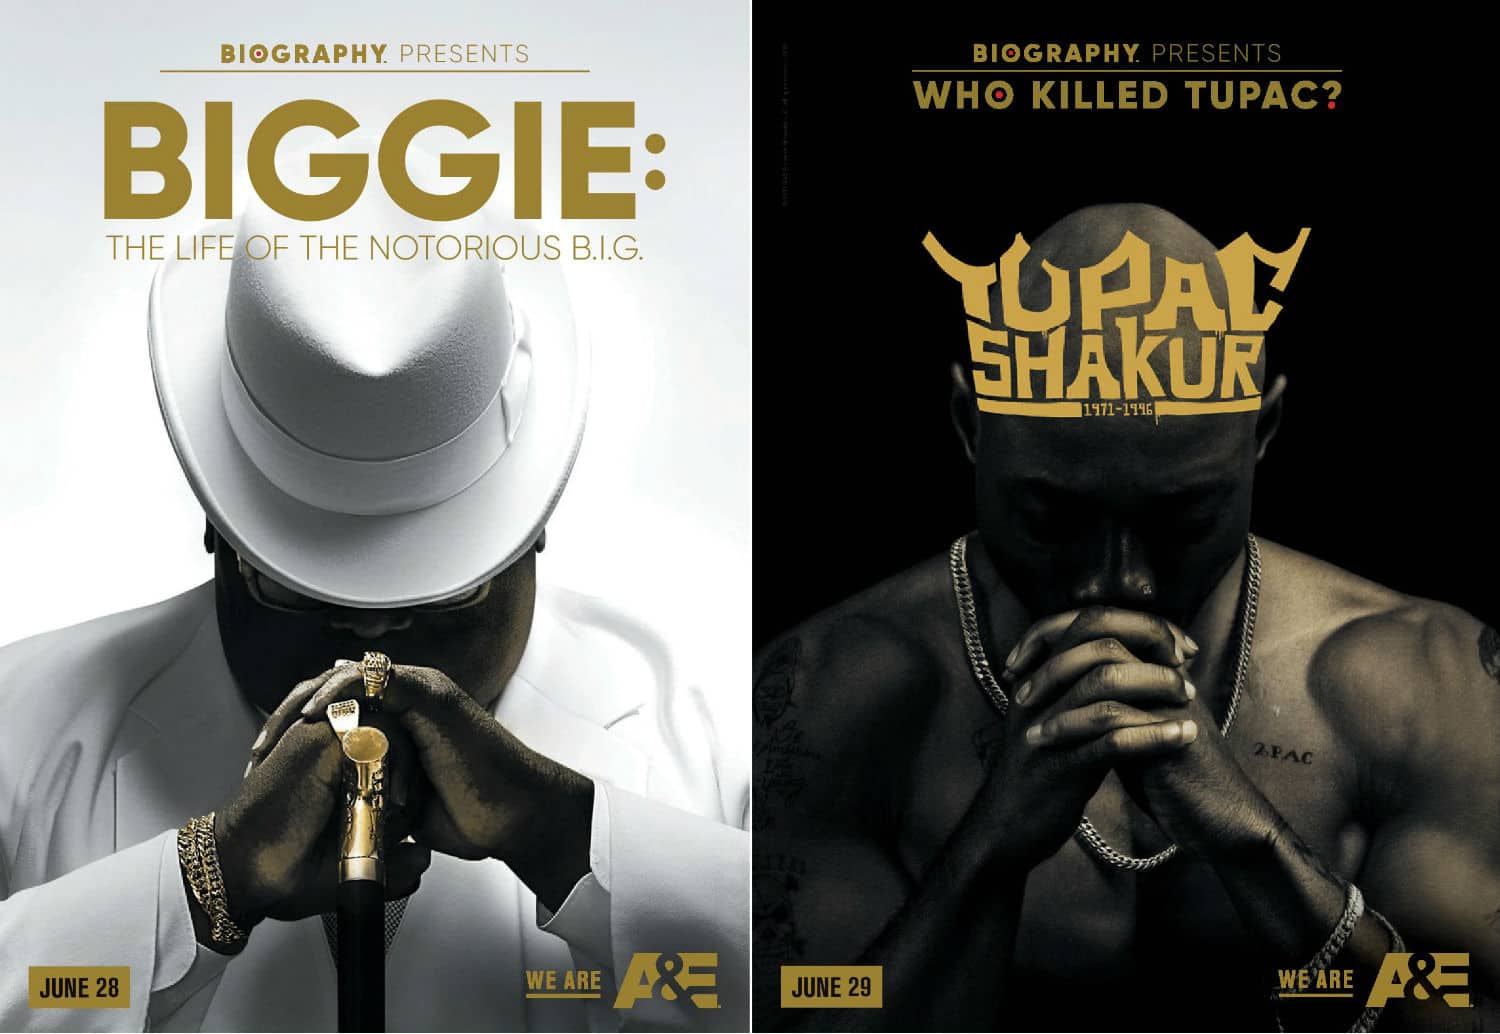 2 Biopics set to redefine history: “Biggie: The Life of Notorious B.I.G.” & “Who Killed Tupac?”